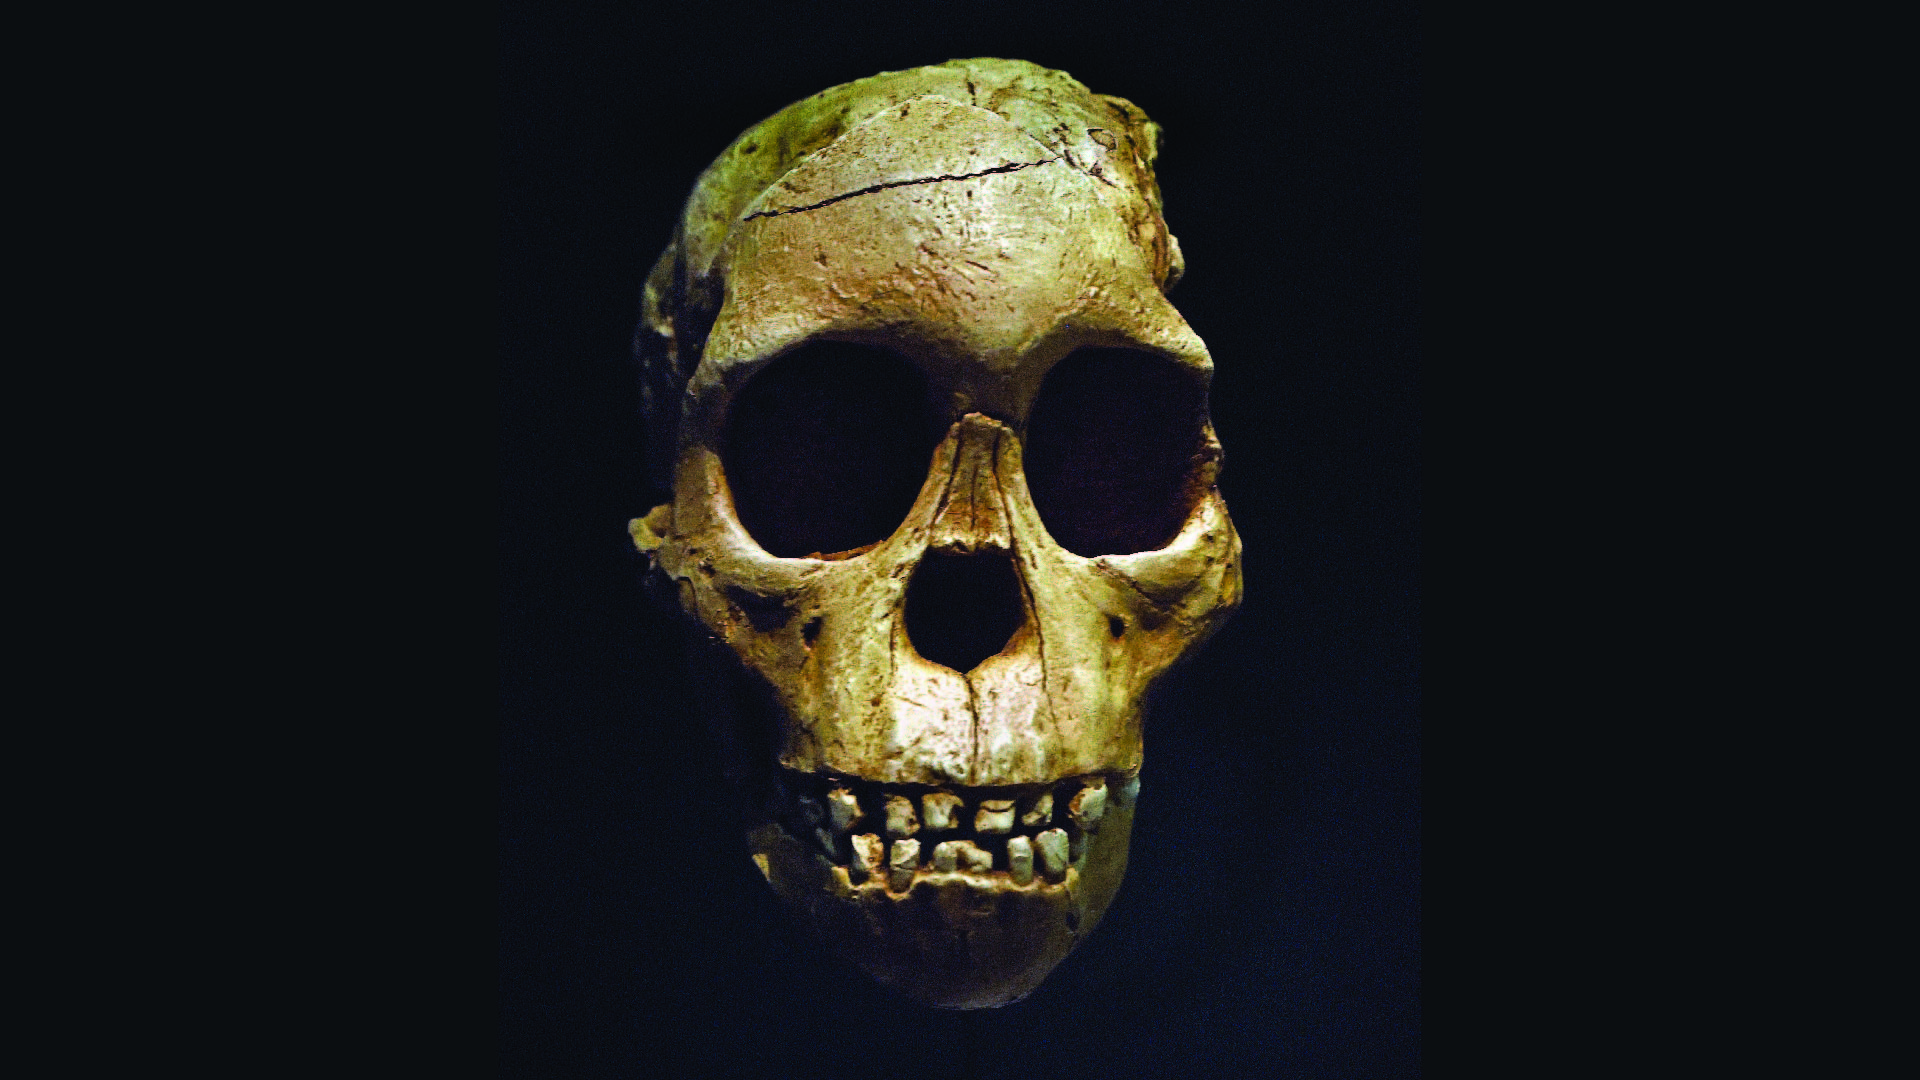  Famous Taung Child fossil from South Africa is 2.58 million years old, new study finds 